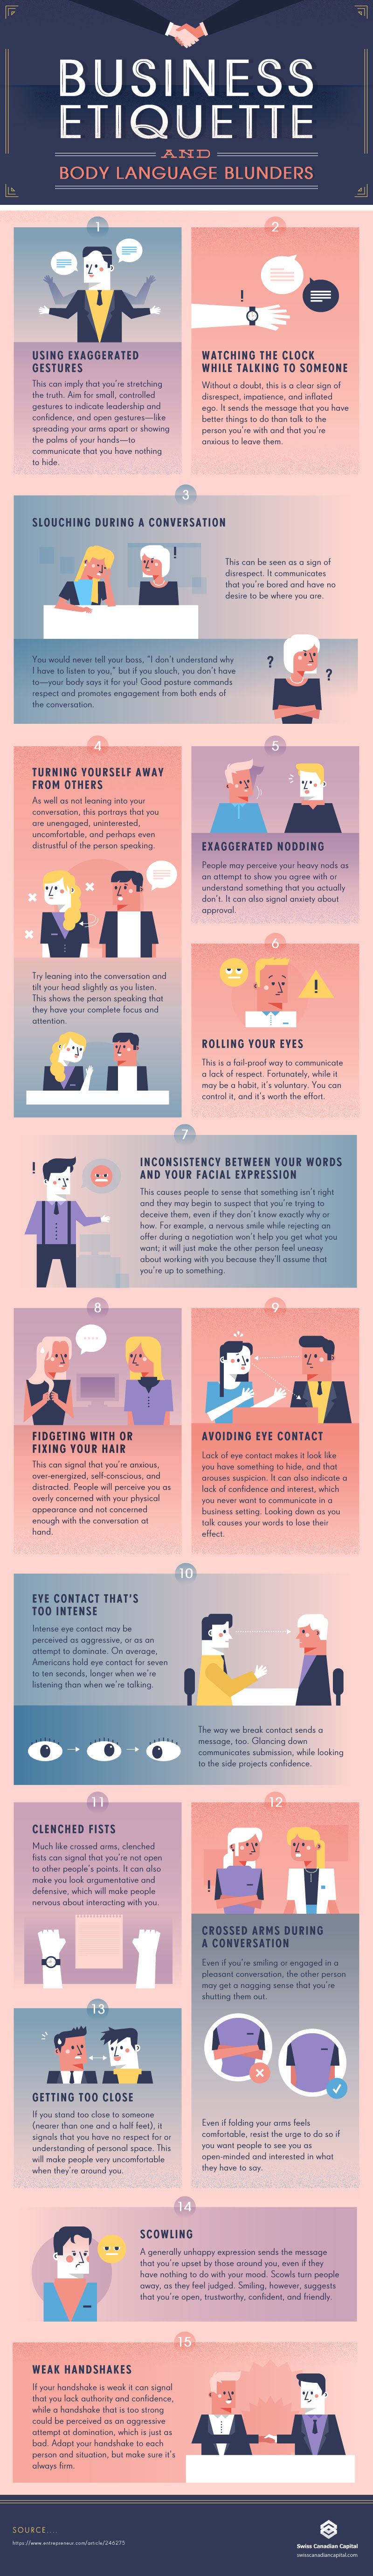 Business Etiquette And Body Language Blunders